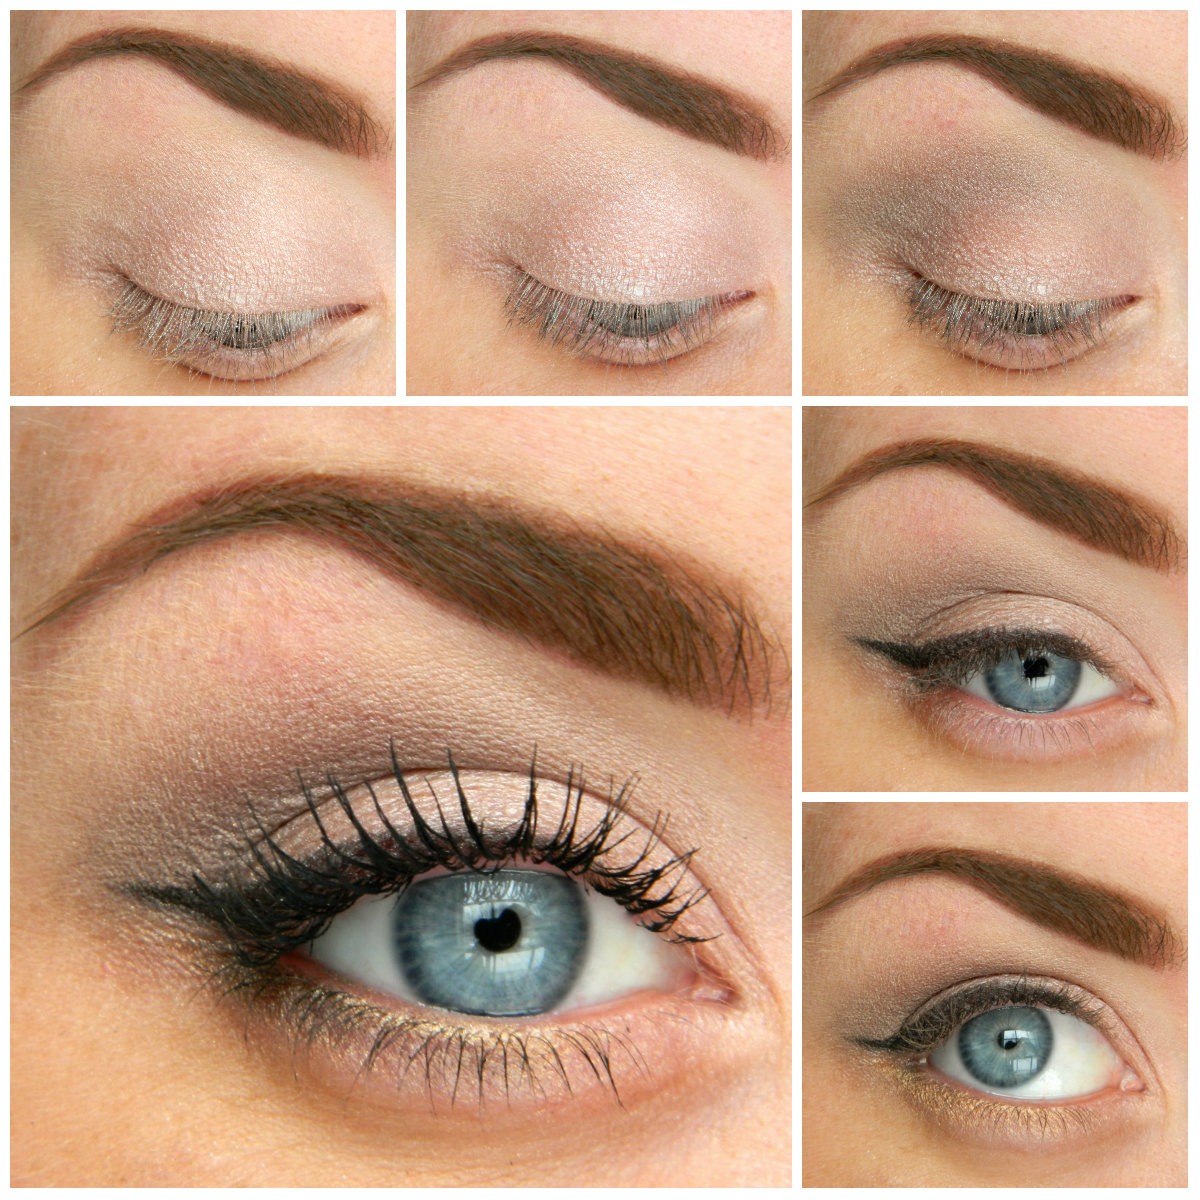 Eye Makeup For Eyes 5 Ways To Make Blue Eyes Pop With Proper Eye Makeup Her Style Code